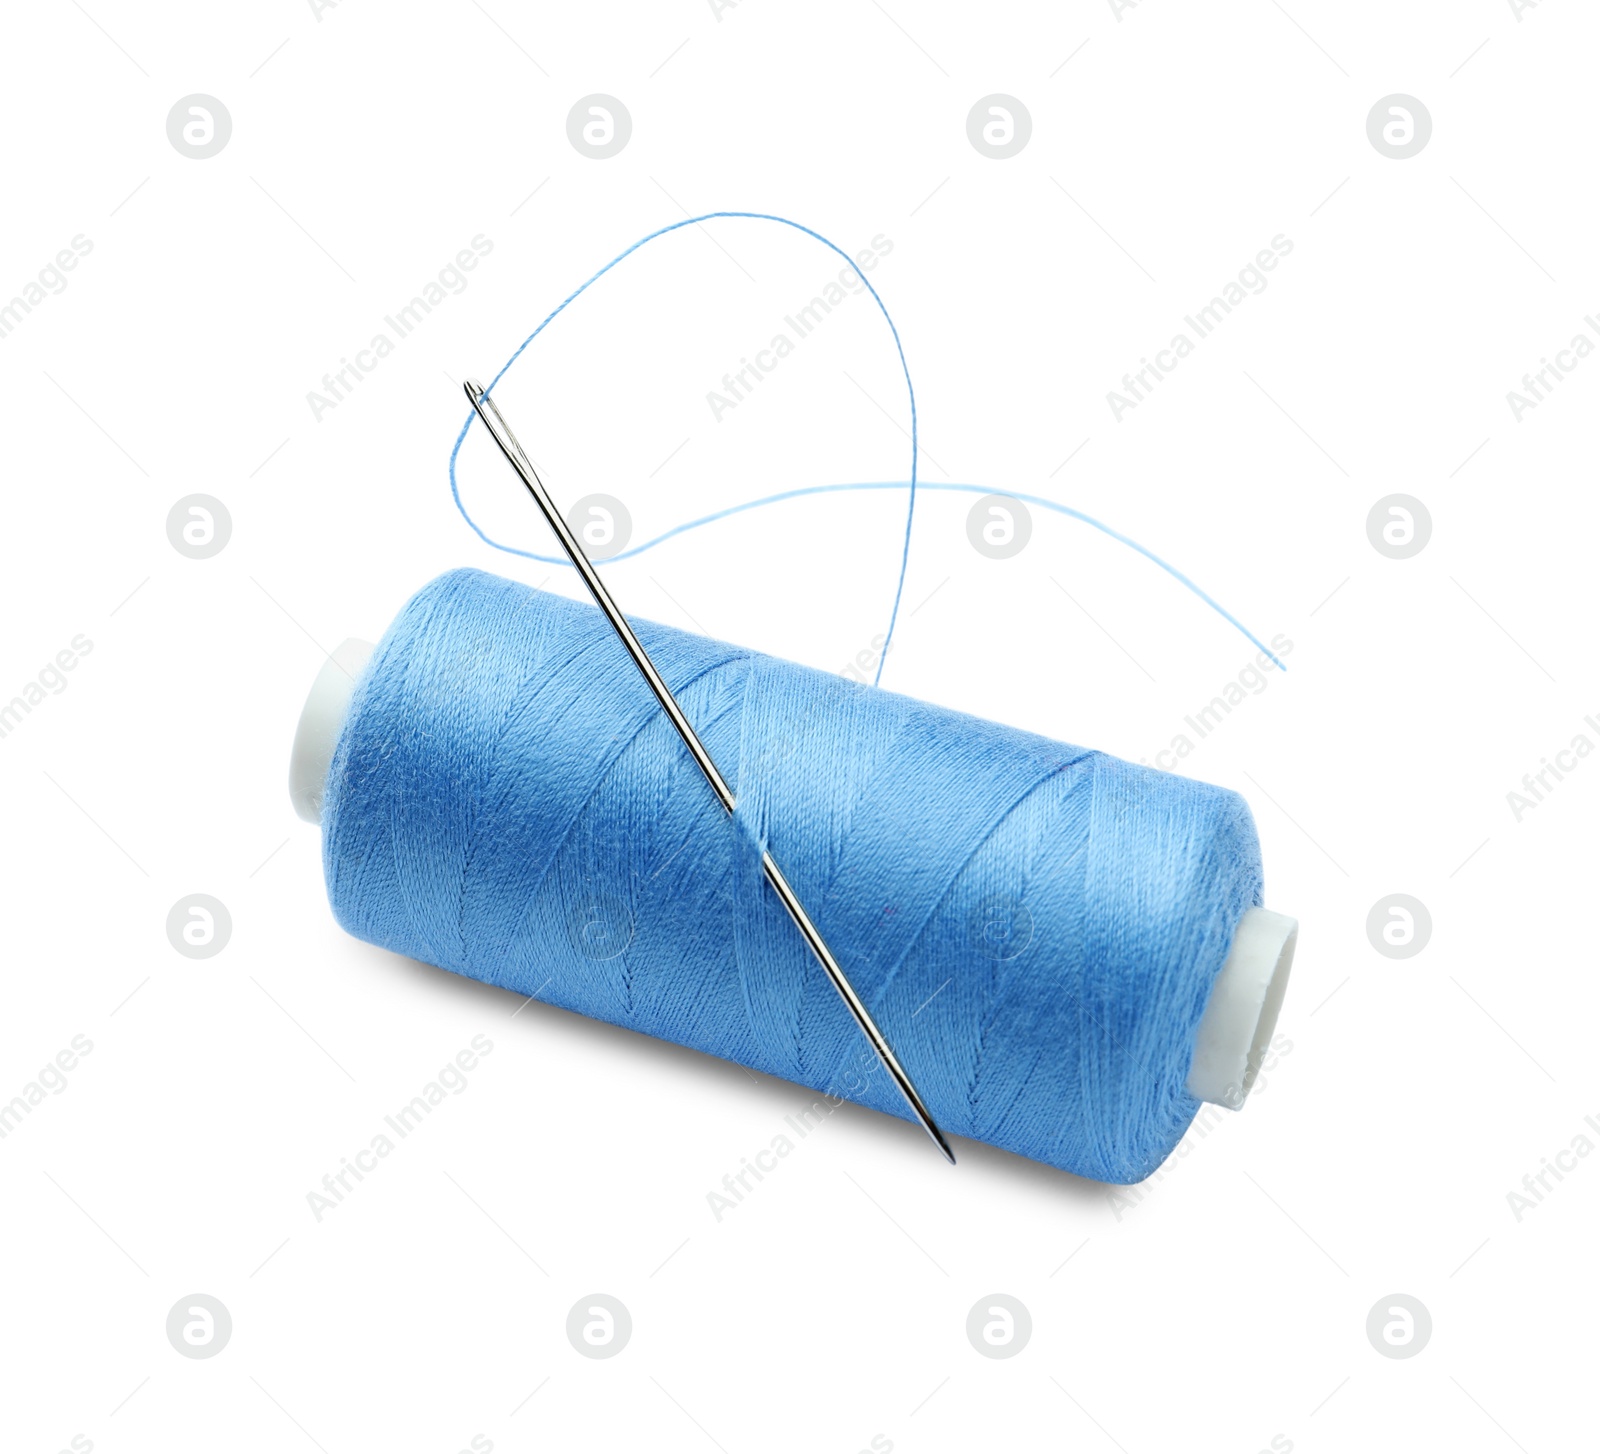 Photo of Spool of light blue sewing thread with needle isolated on white